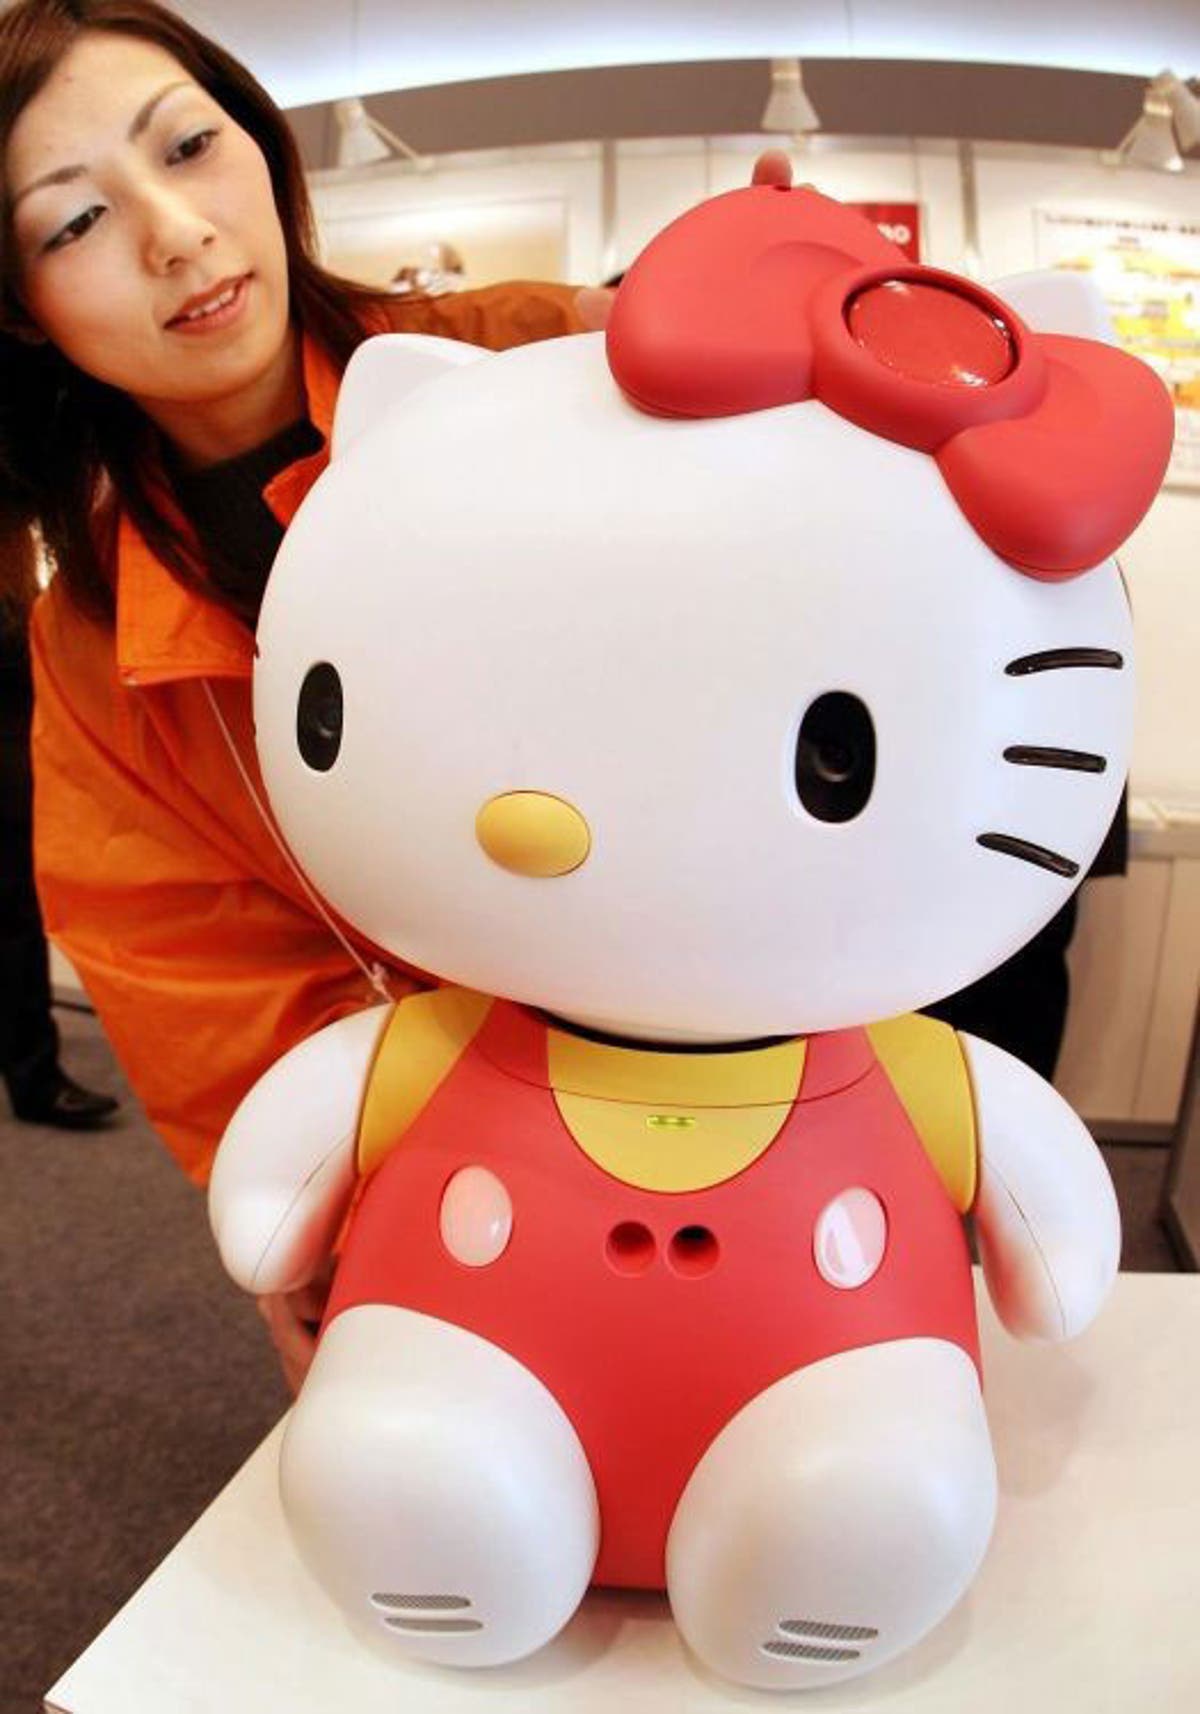 Web design of the official online store of Hello Kitty